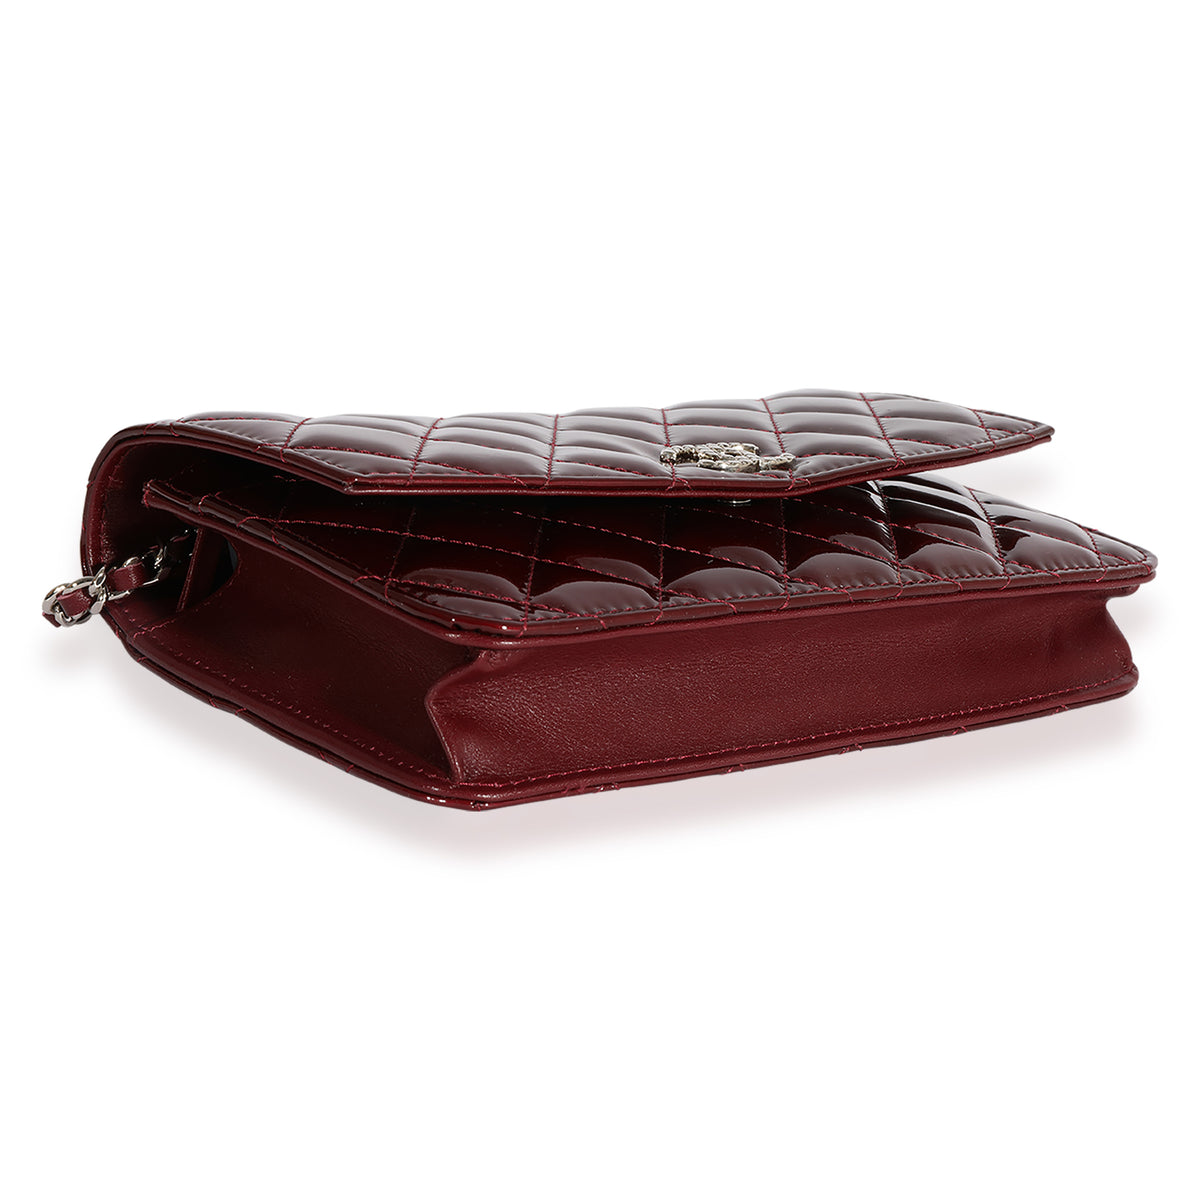 Chanel Burgundy Quilted Patent Leather Brilliant Wallet On Chain